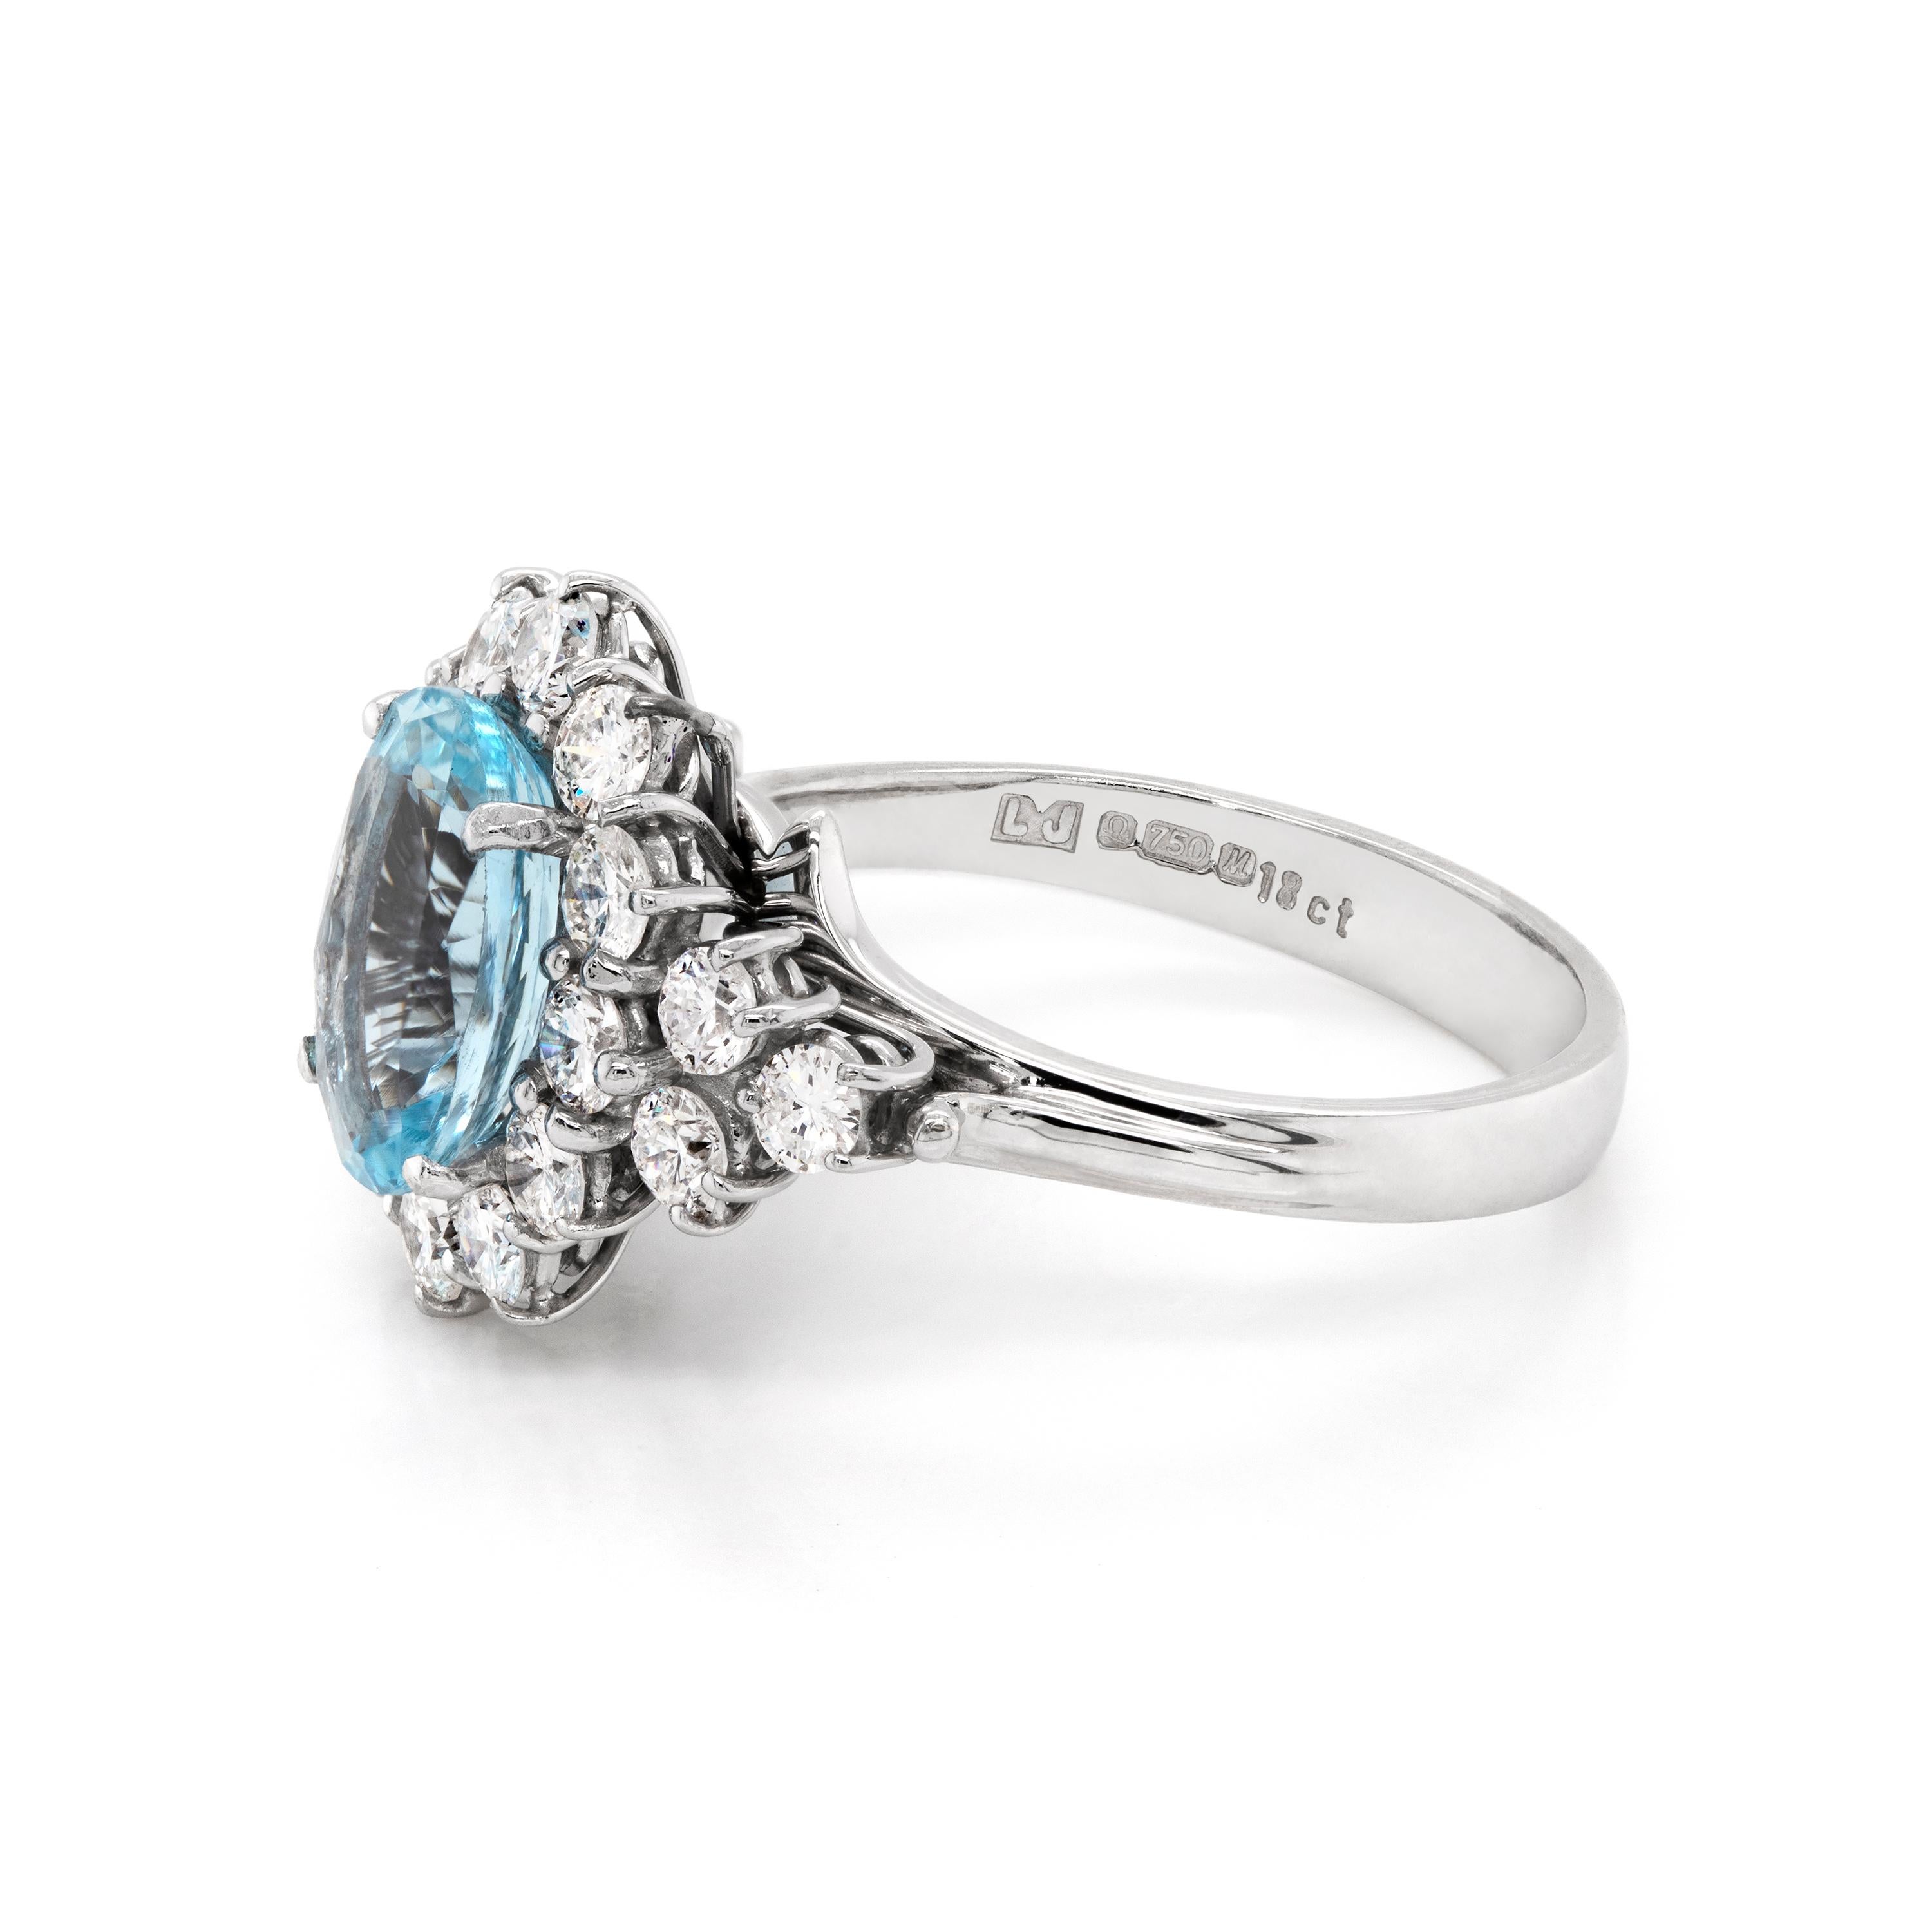 This exquisite engagement ring features a vibrant oval shaped aquamarine weighing 2.07ct set in an open back, four claw setting. The aquamarine is beautifully surrounded by 12 round brilliant cut diamonds, with an added cluster of three diamonds